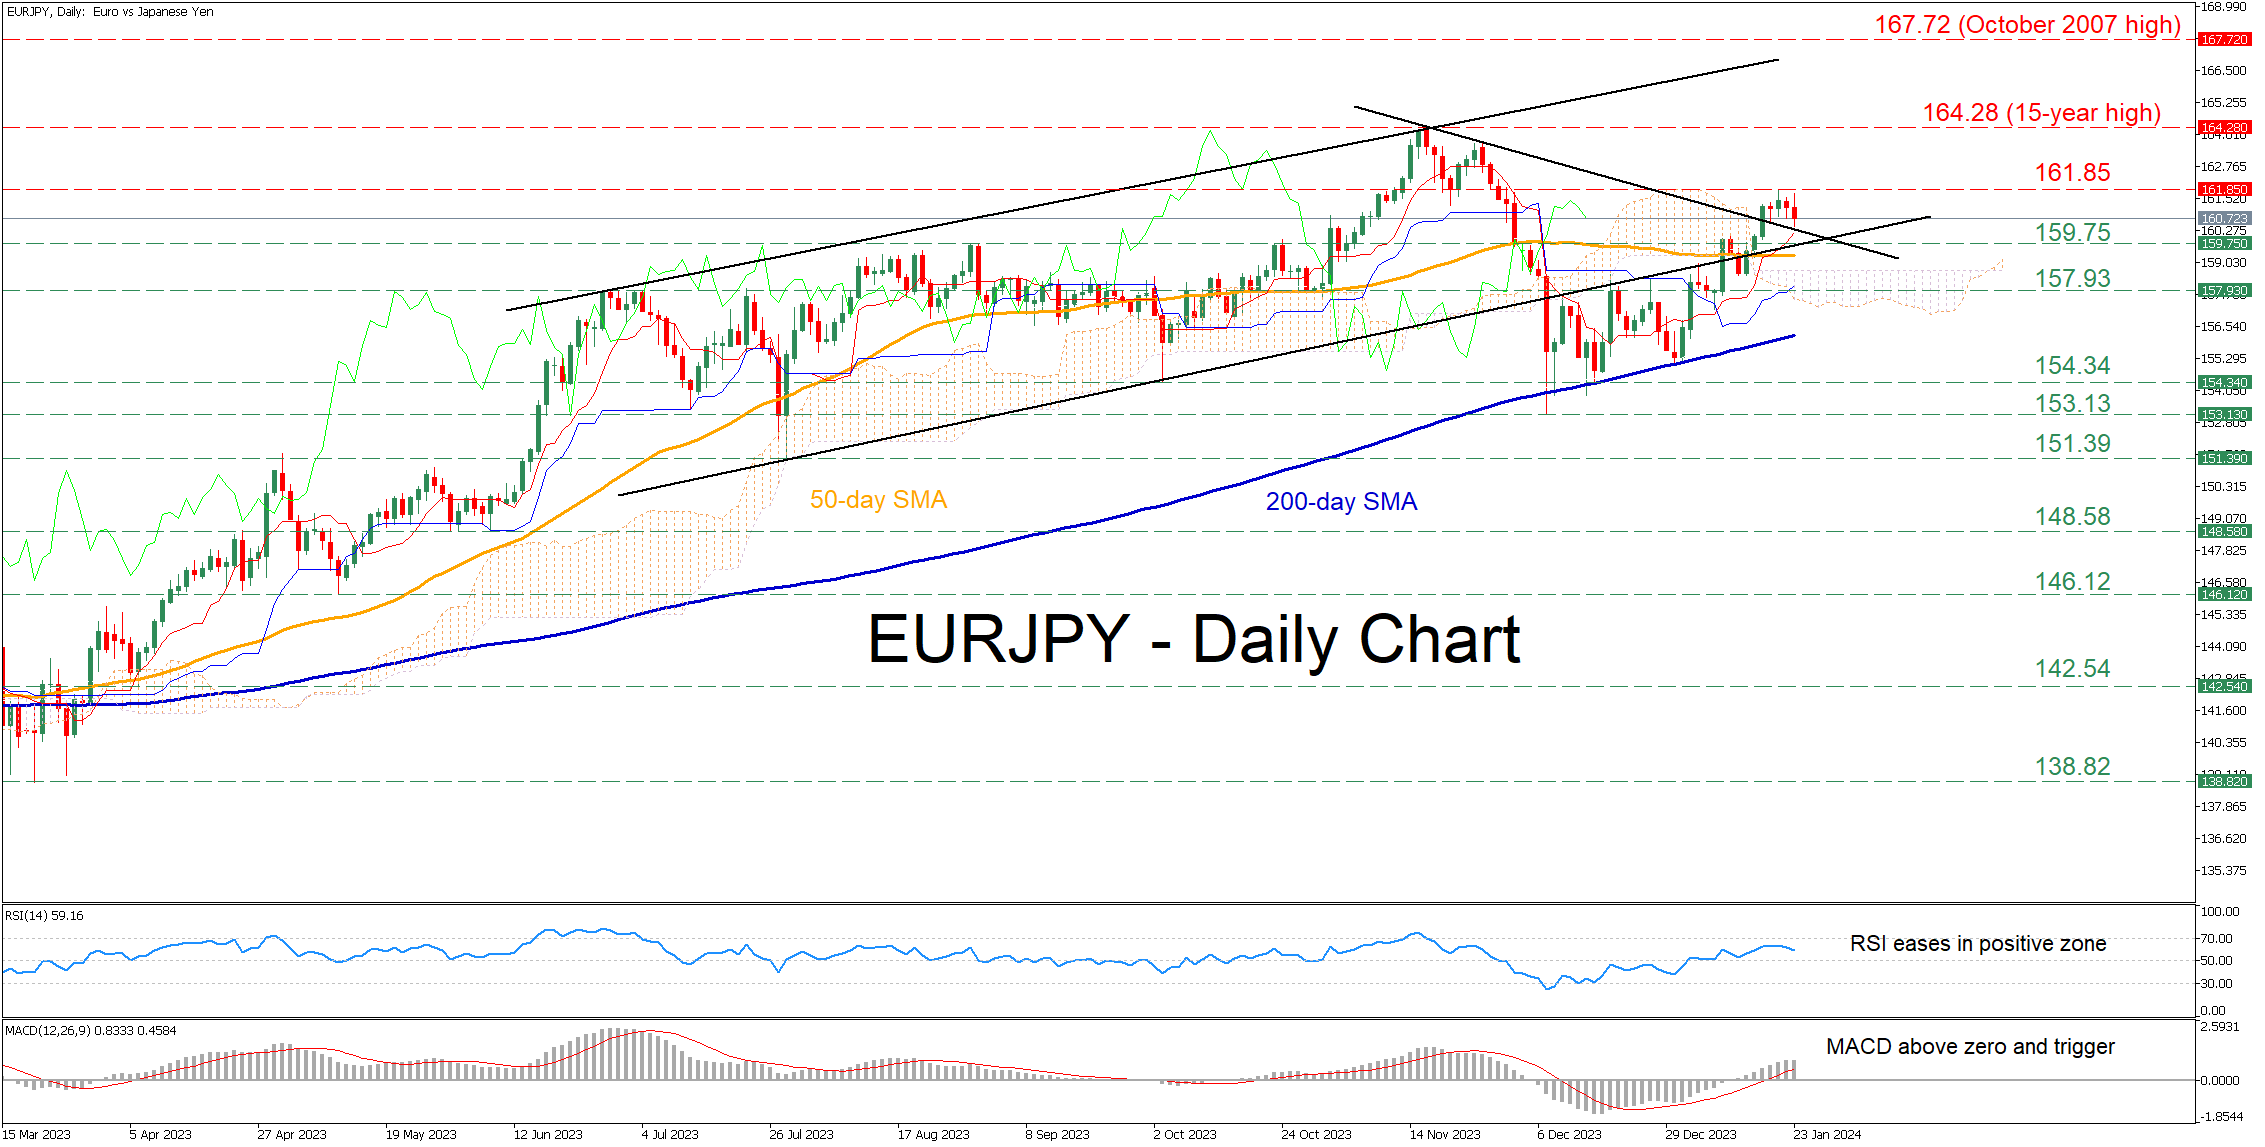 EURJPY Re-Enters Bullish Channel, Supported by 200-Day SMA